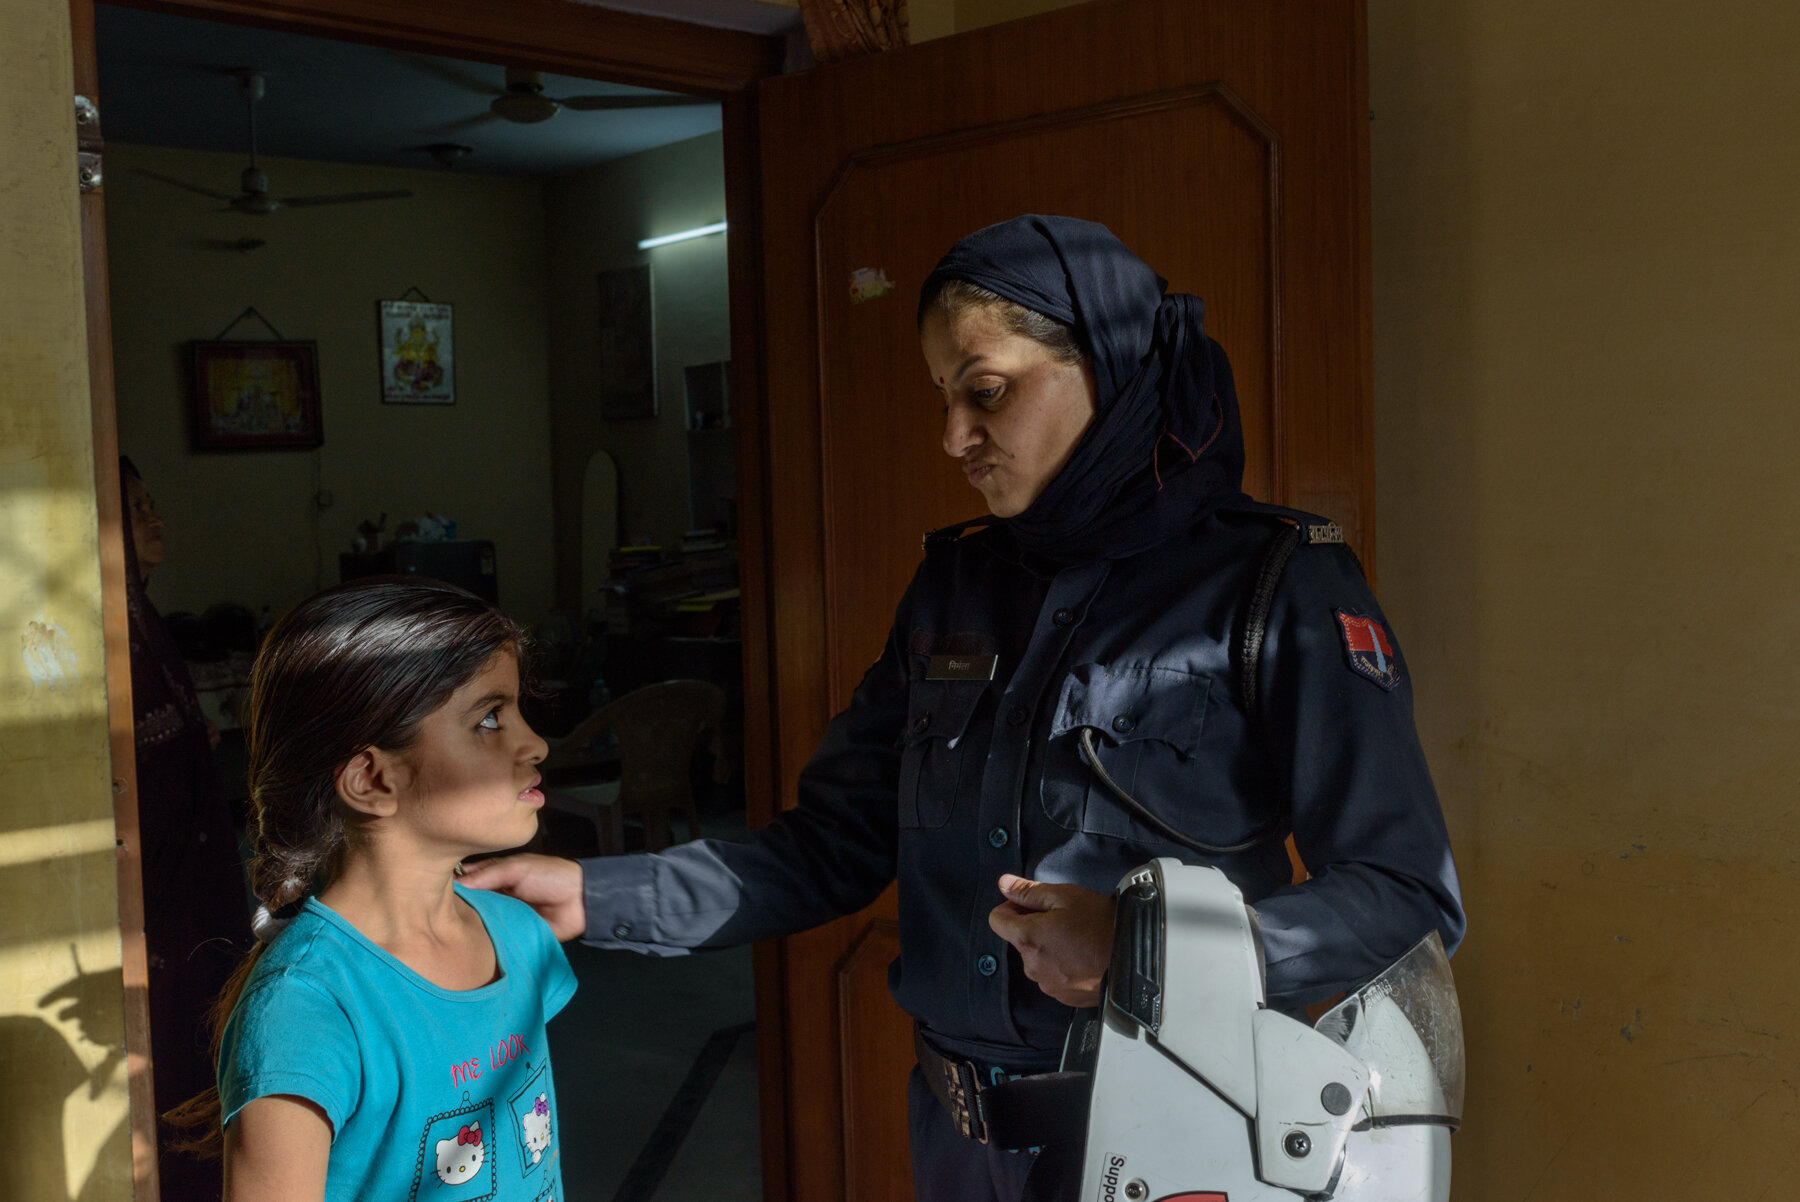  Nirmala Lakhera, 42,  with her daughter Krishna, 9, at home before leaving for duty on 21st April, 2018. 